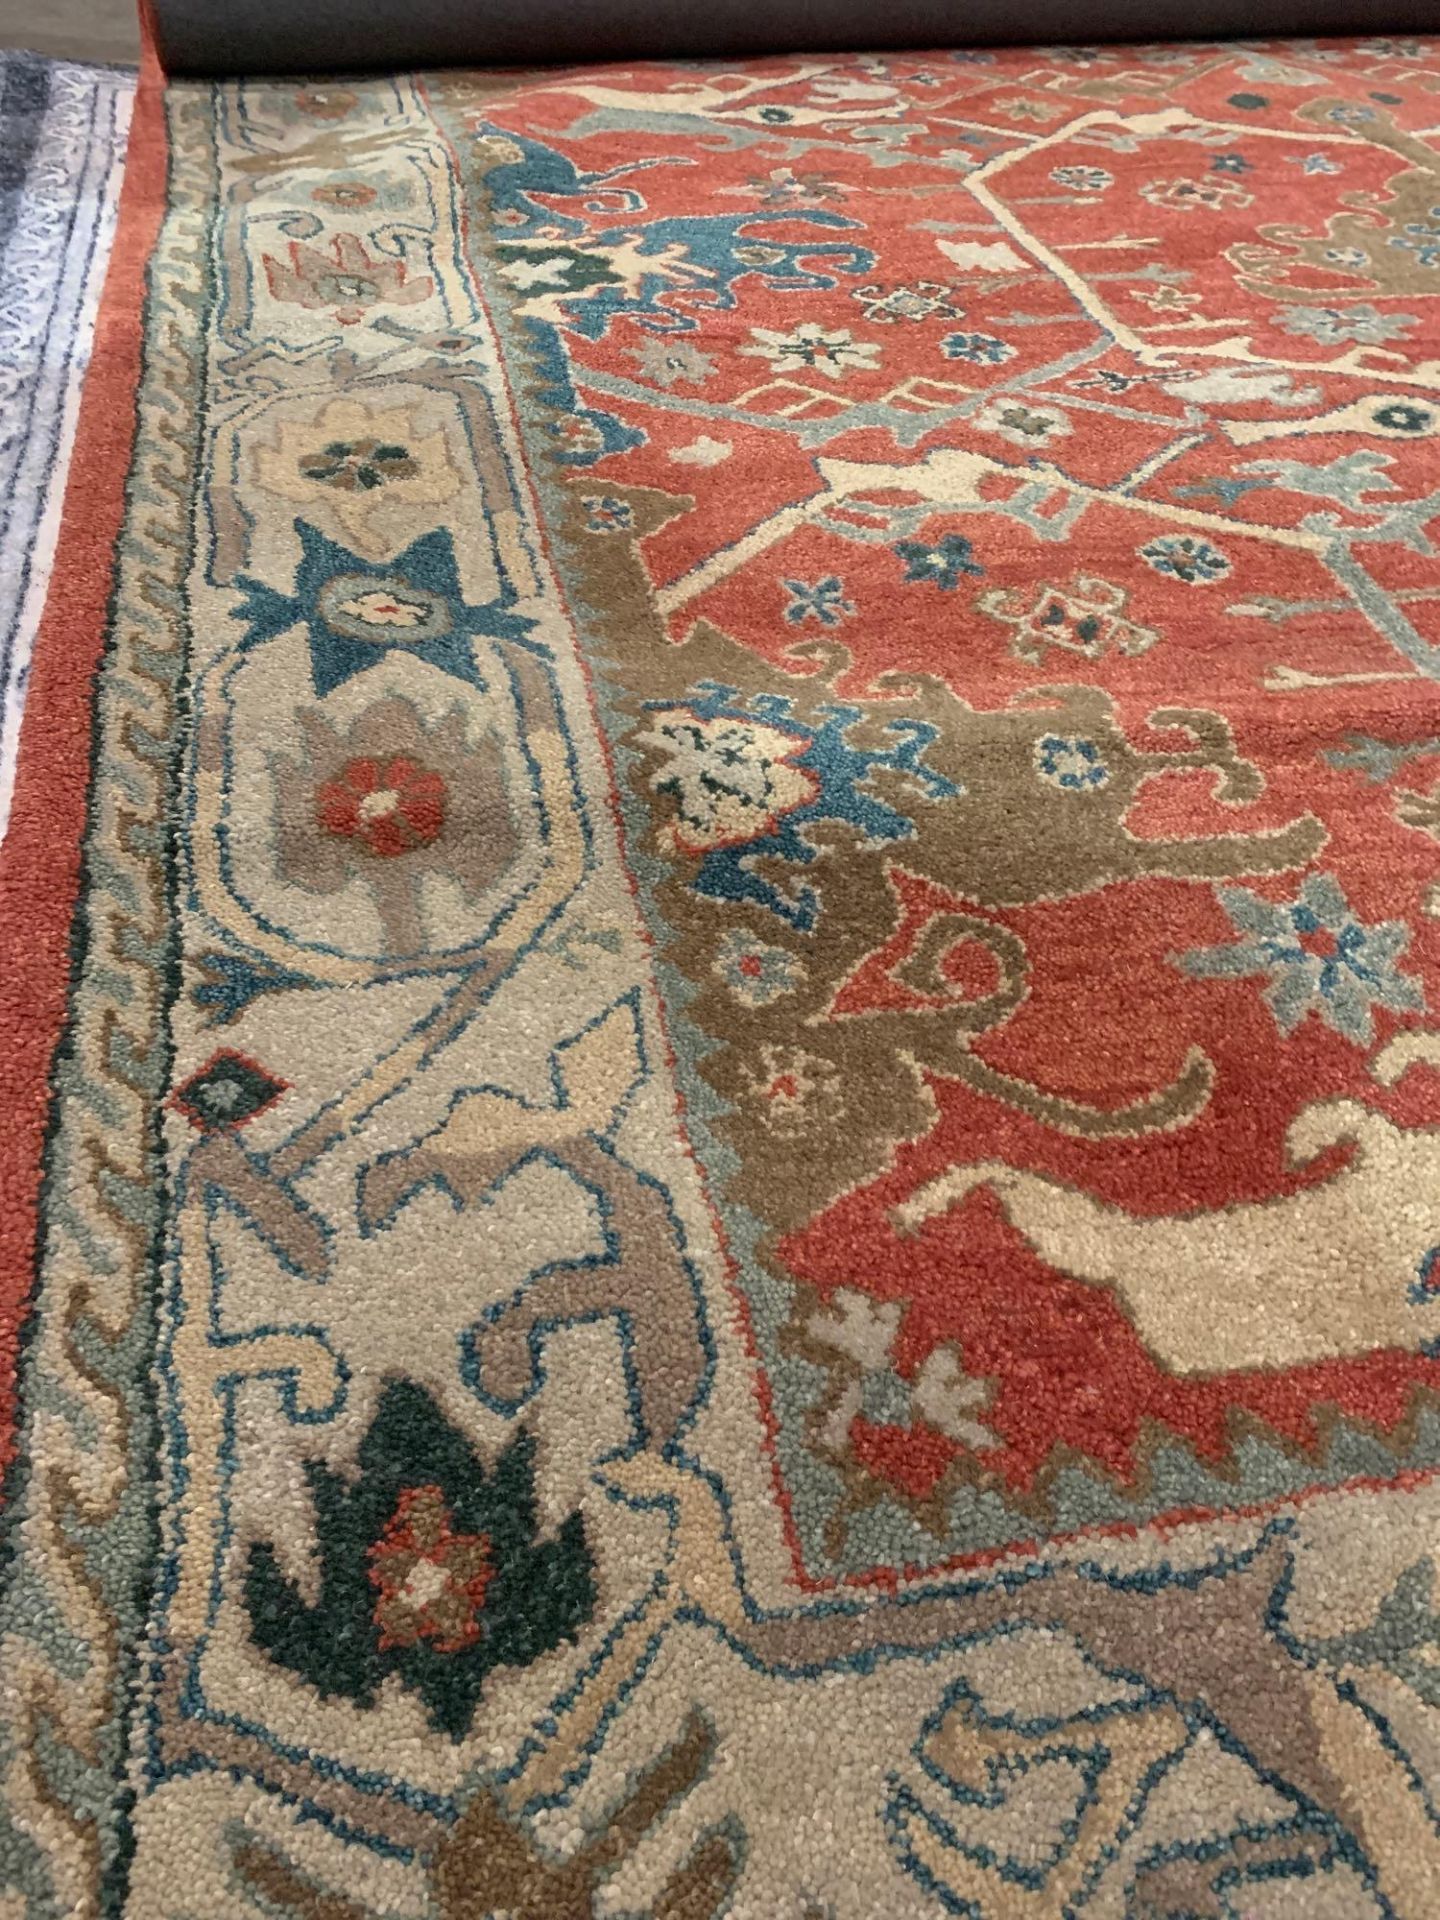 Traditional Persian Area Rug A Stunning Repeating Pattern 100% Wool Hand Tufted Rug Vibrant In - Image 3 of 8